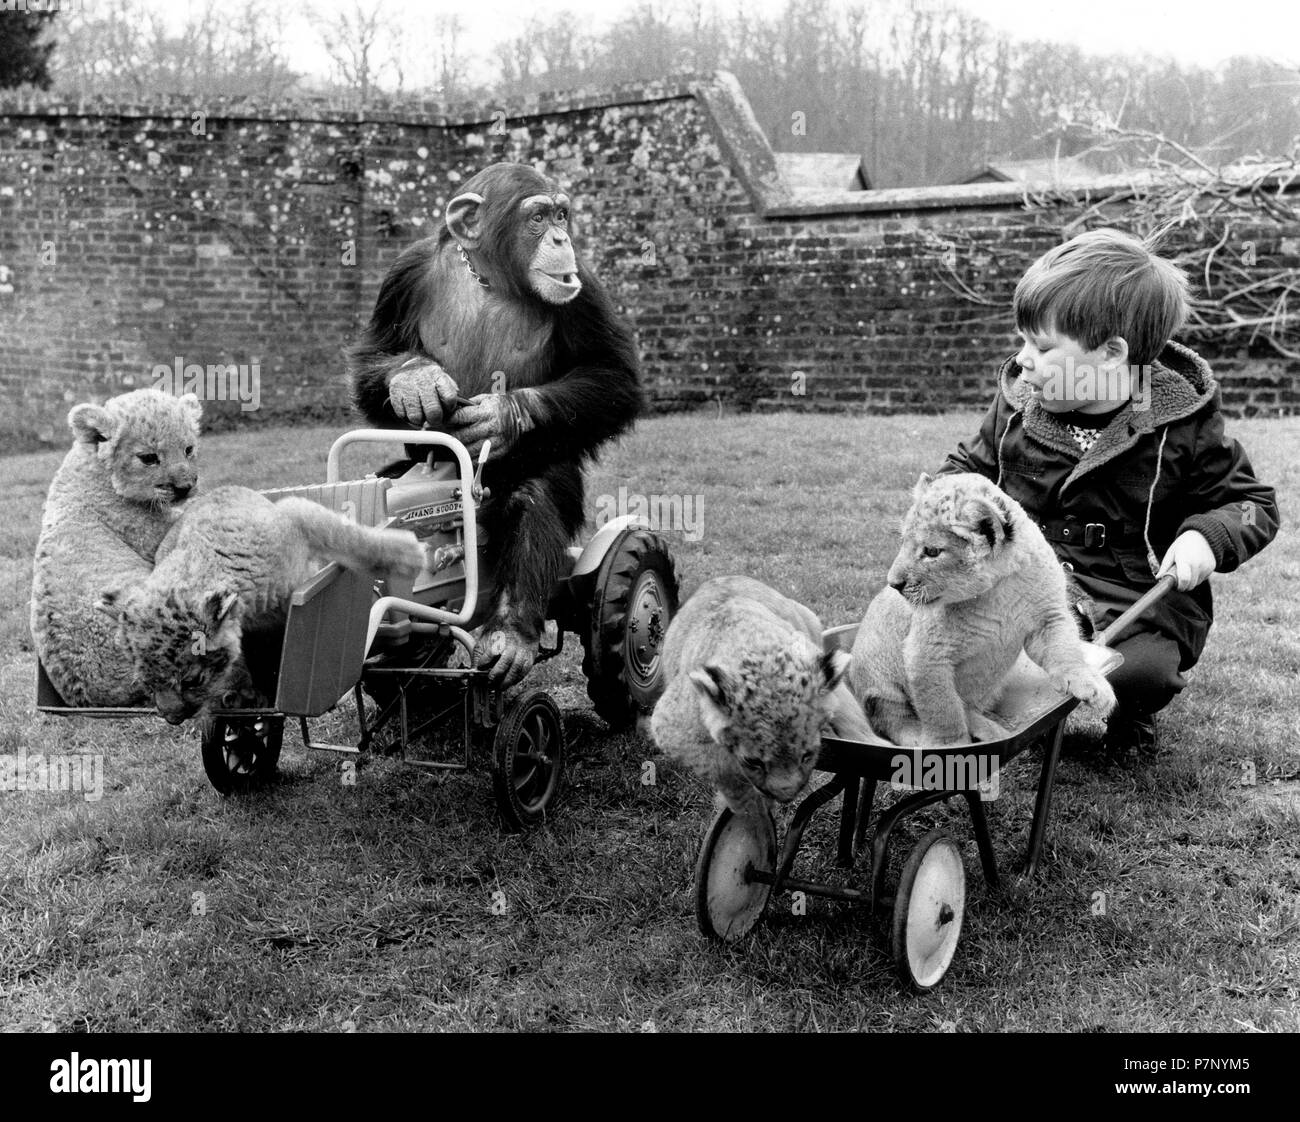 Chimpanzee on tractor plays with a little boy and baby lions, England, Great Britain Stock Photo